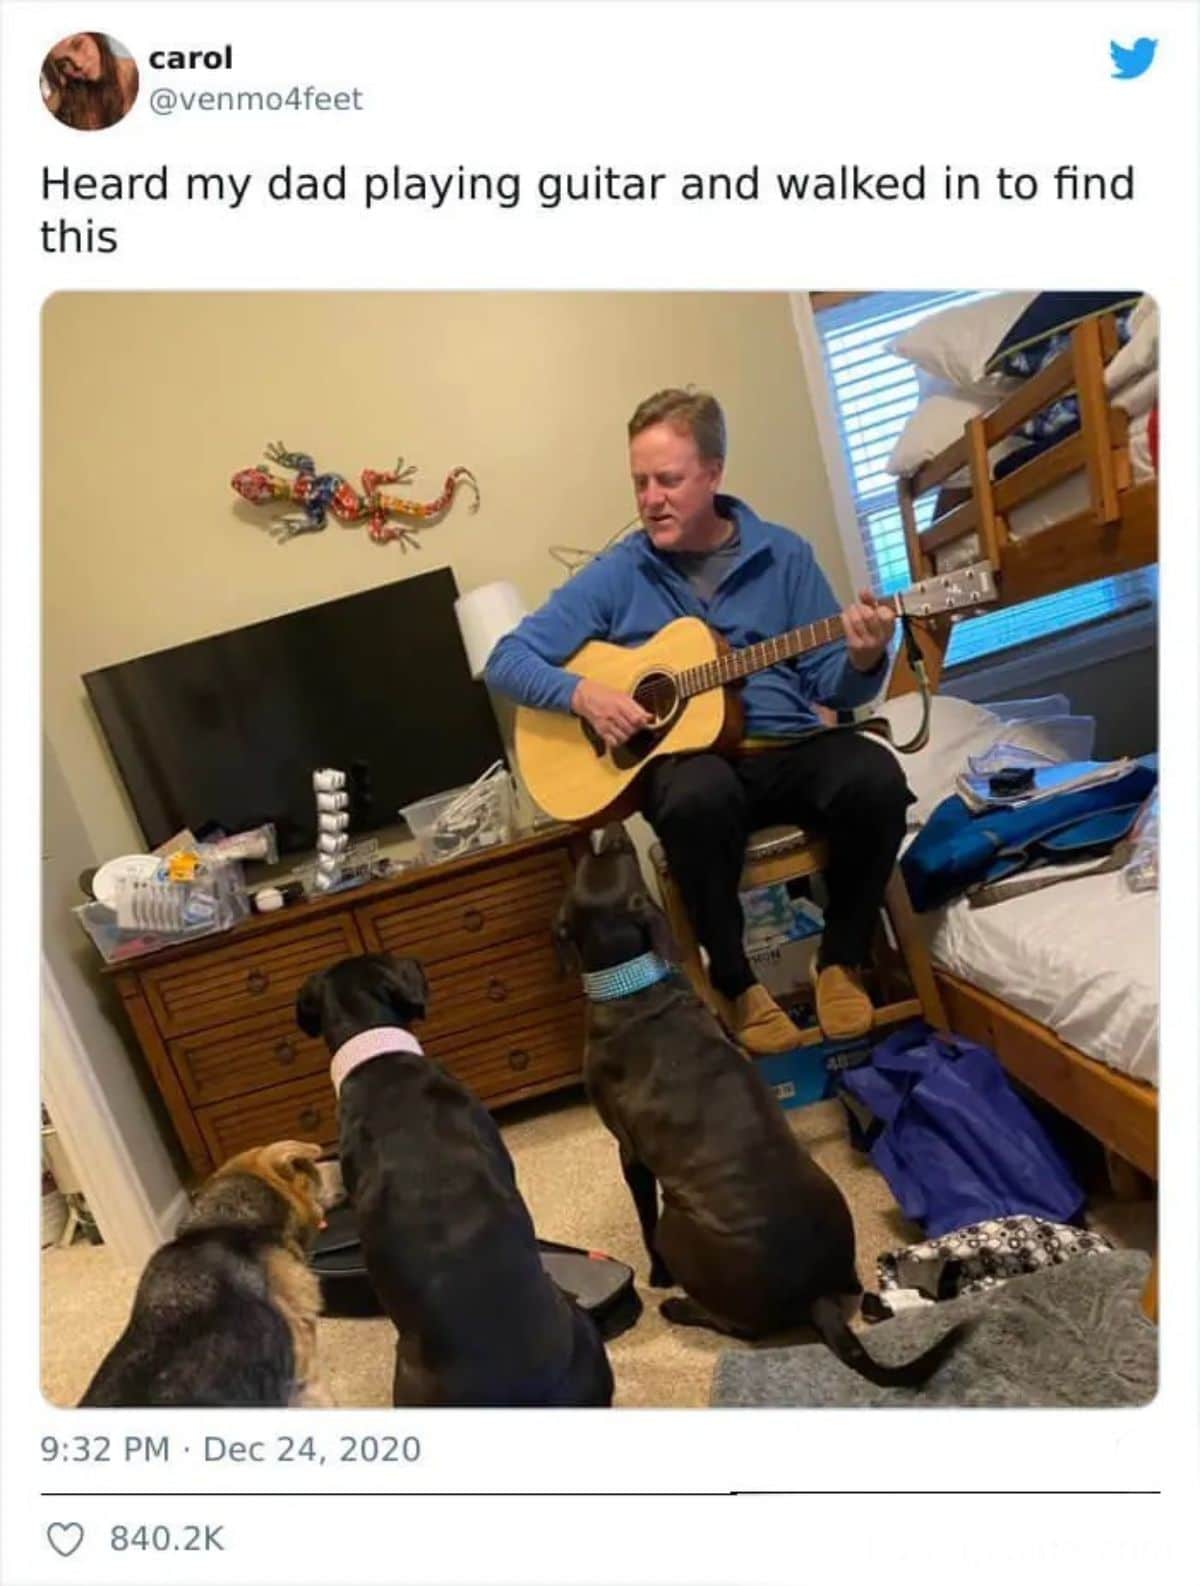 1 black and brown dog and 2 black dogs sitting in front of a man playing guitar on a stool